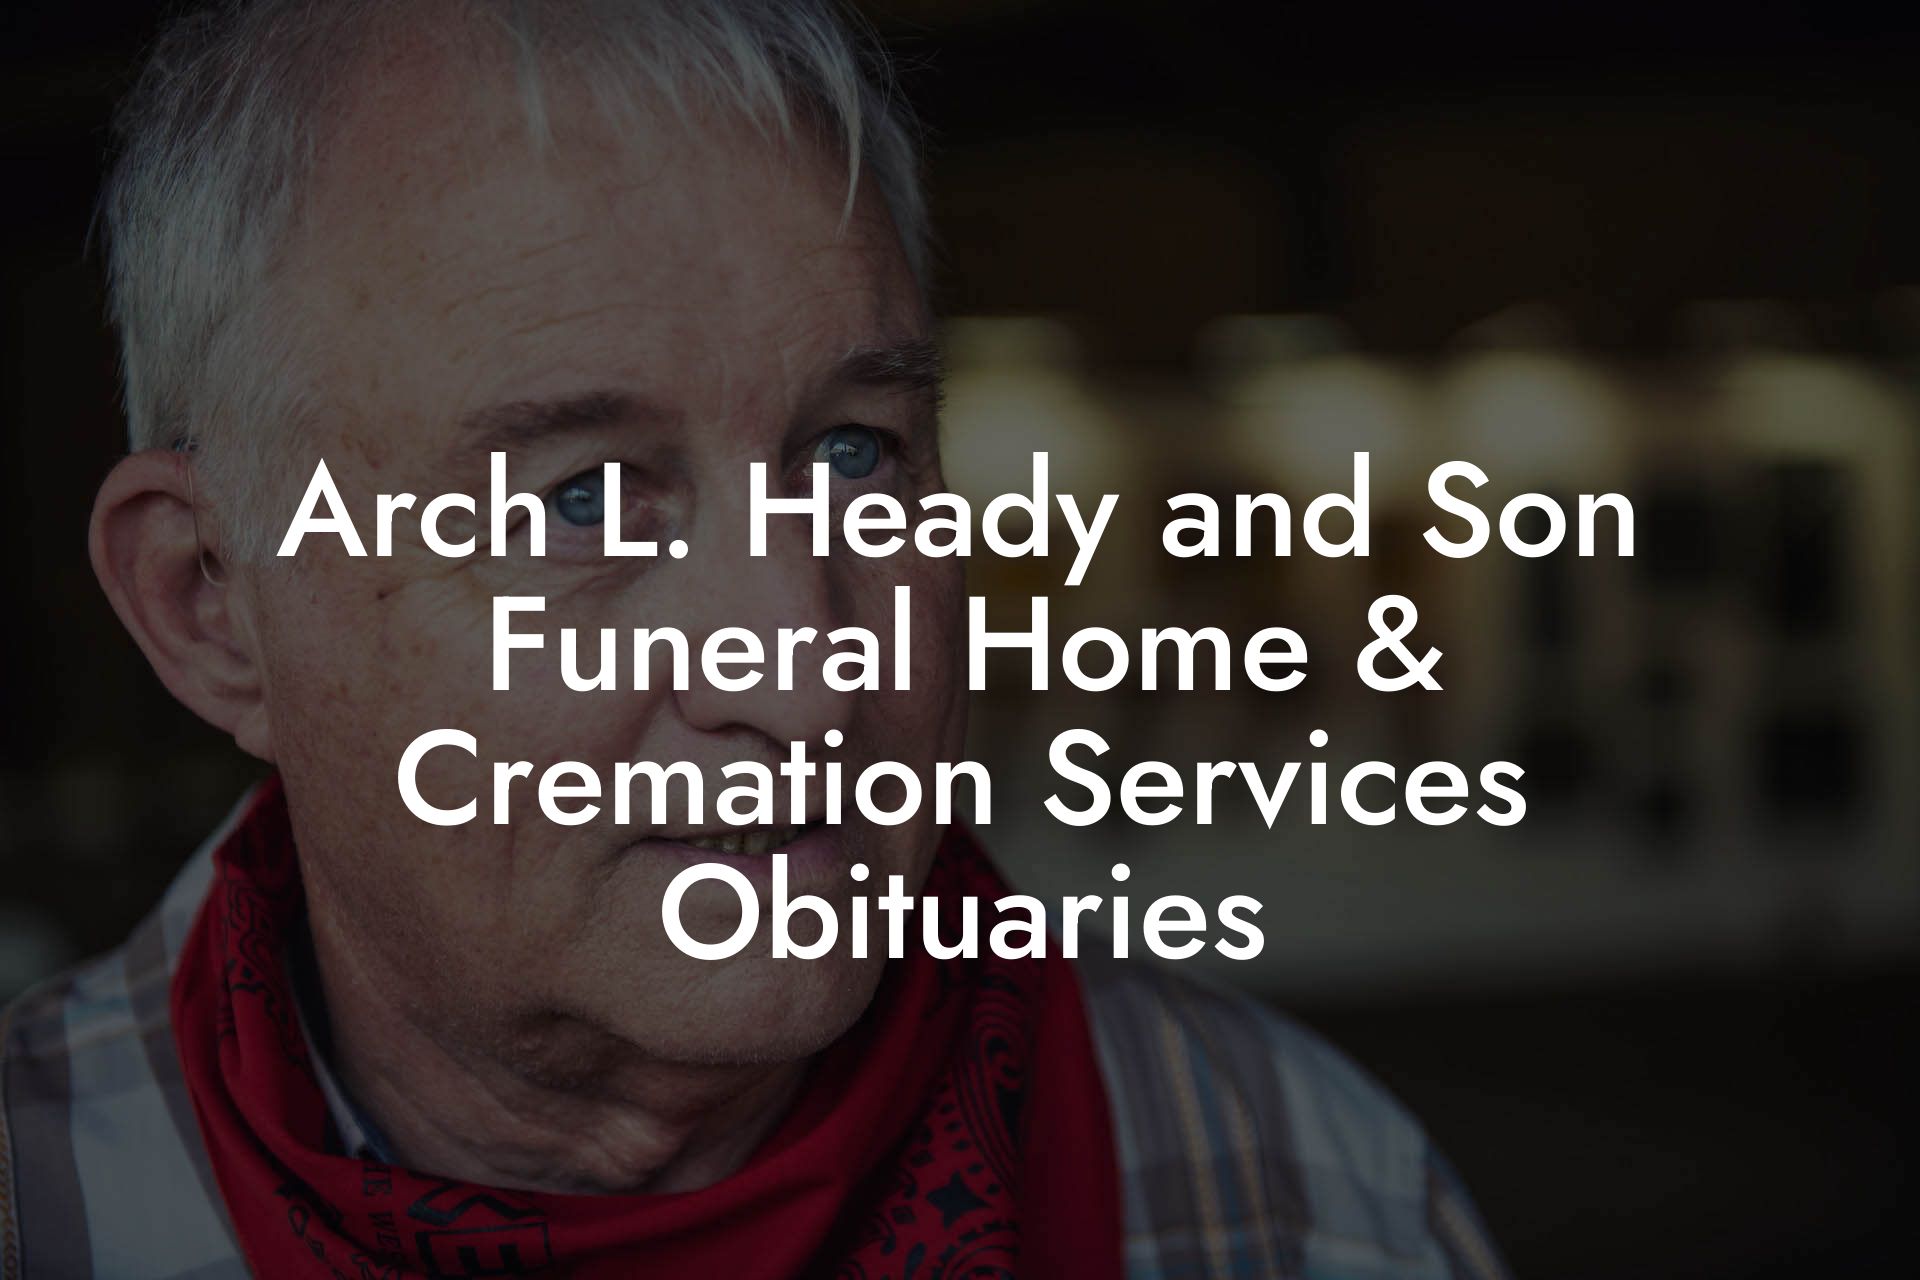 Arch L. Heady and Son Funeral Home & Cremation Services Obituaries